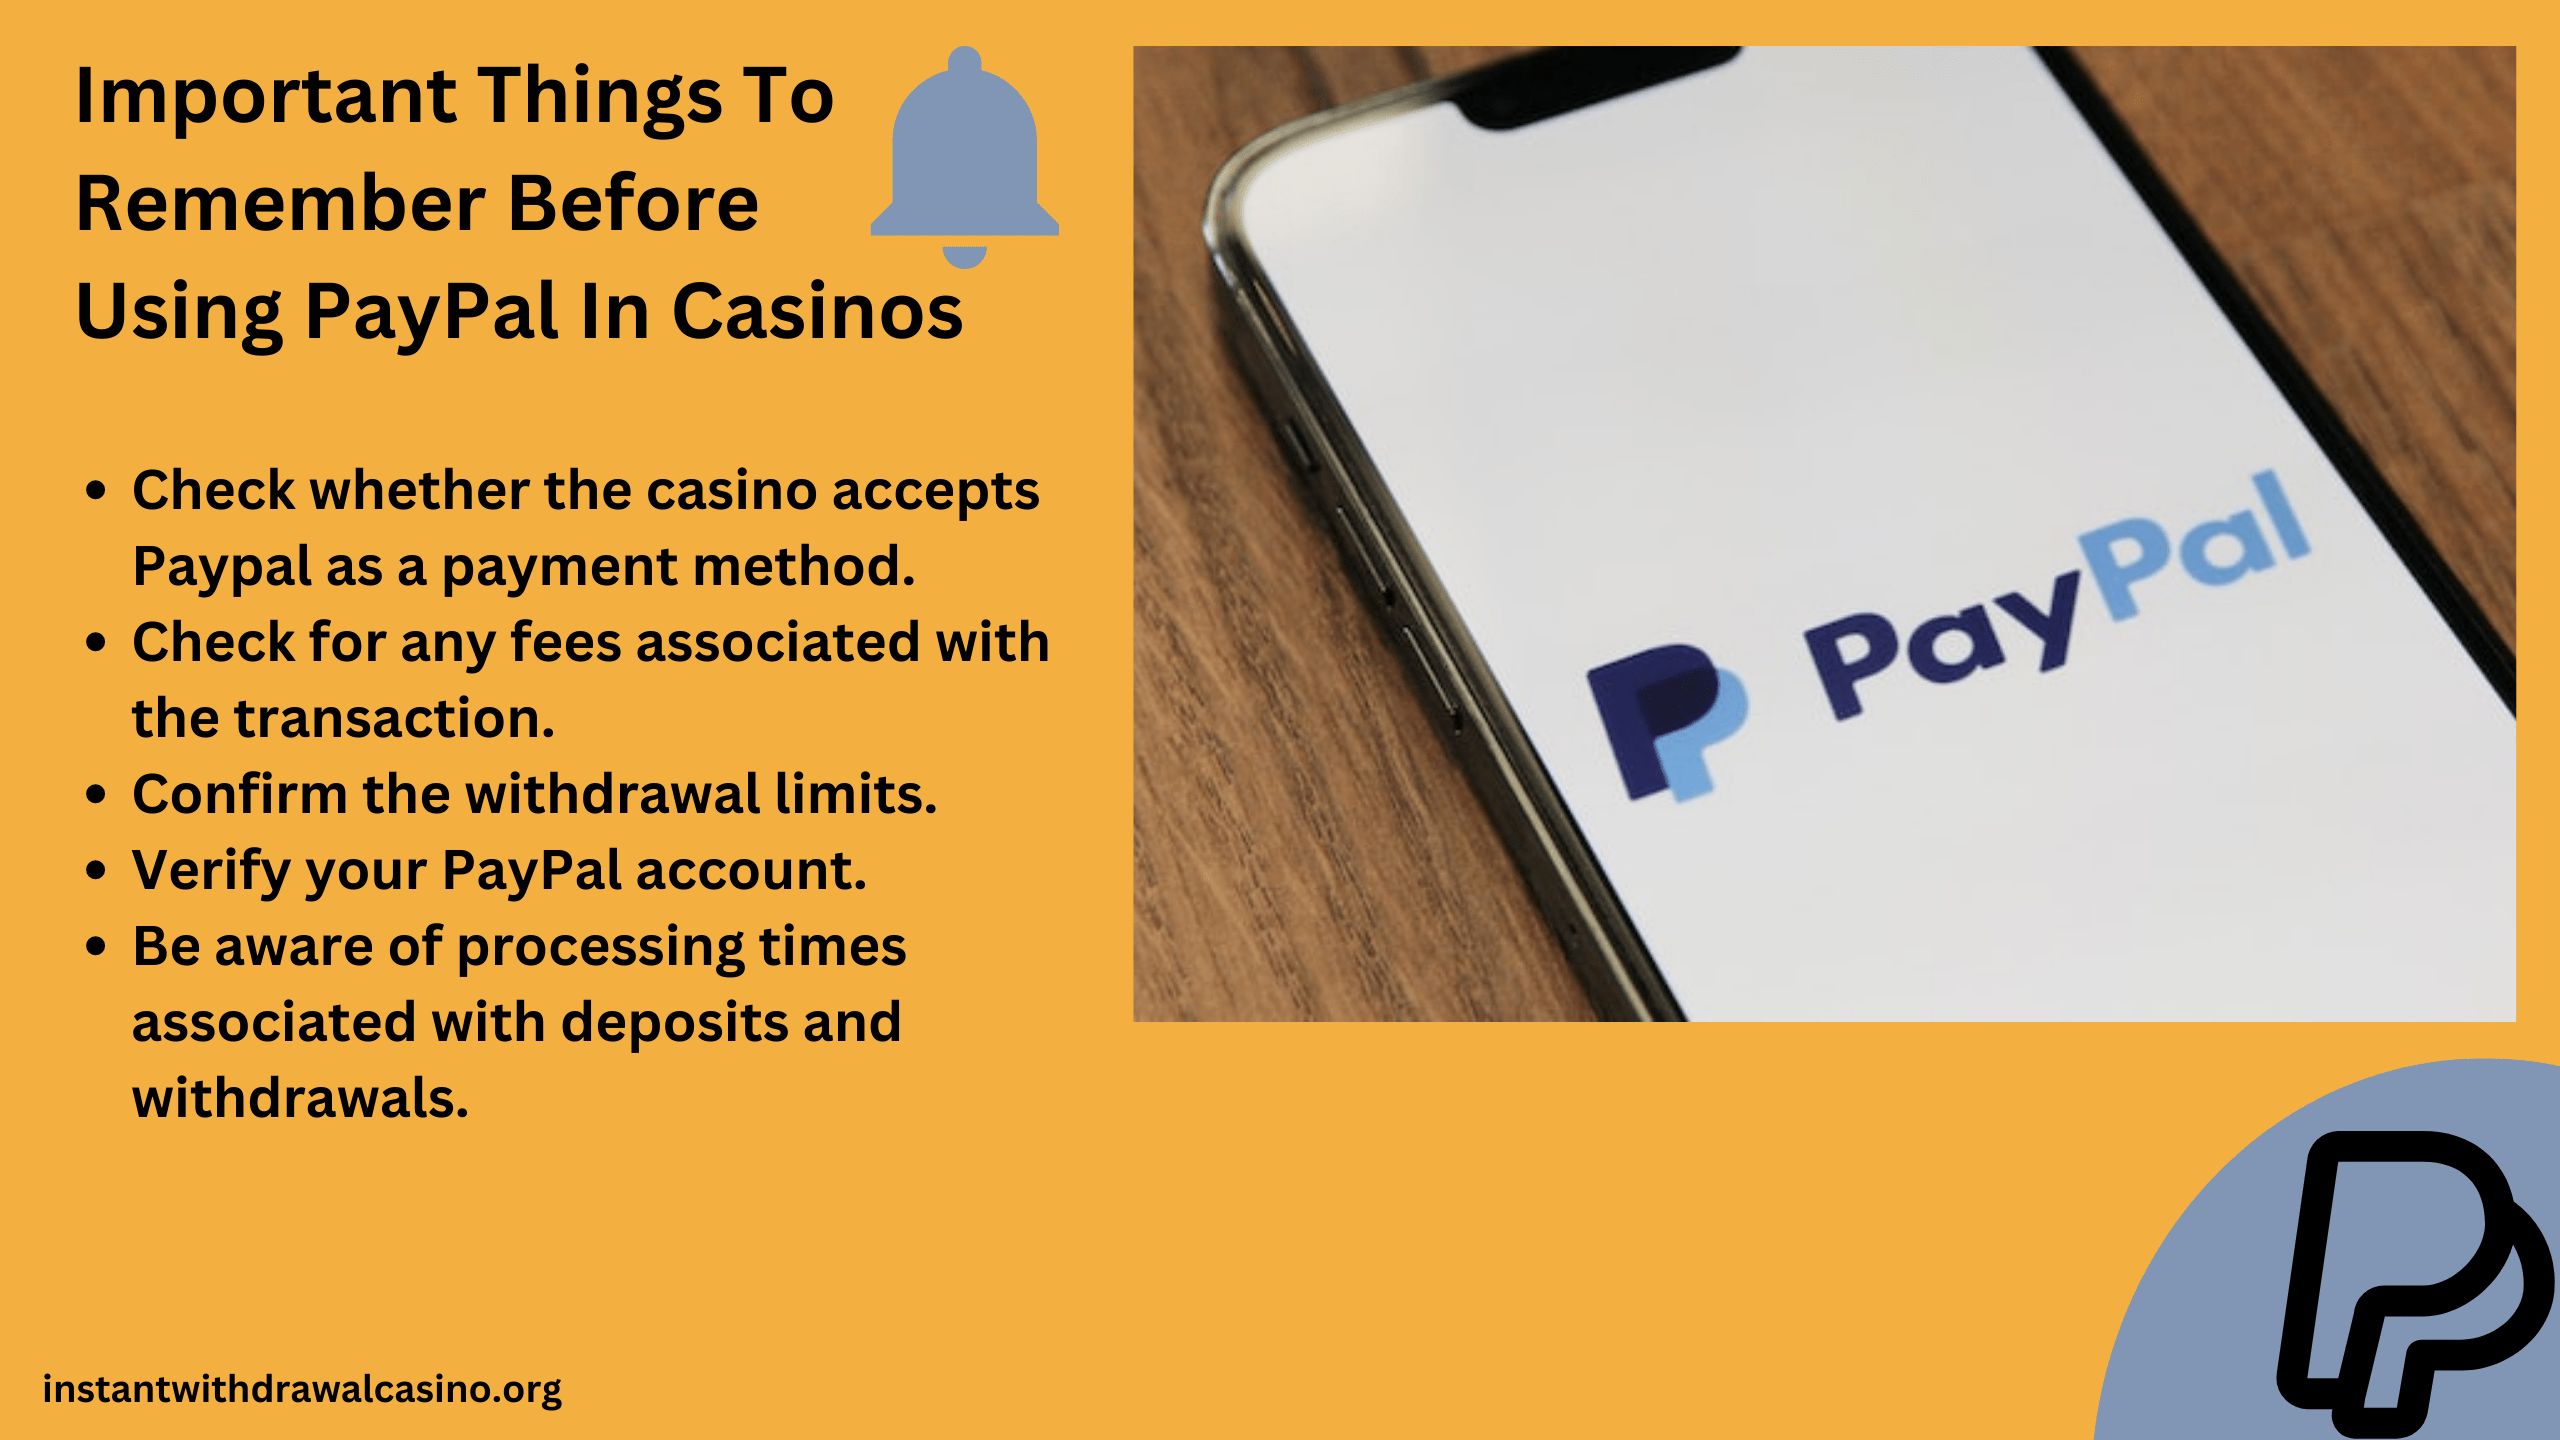 Important things to remember when using instant paypal withdrawal casino